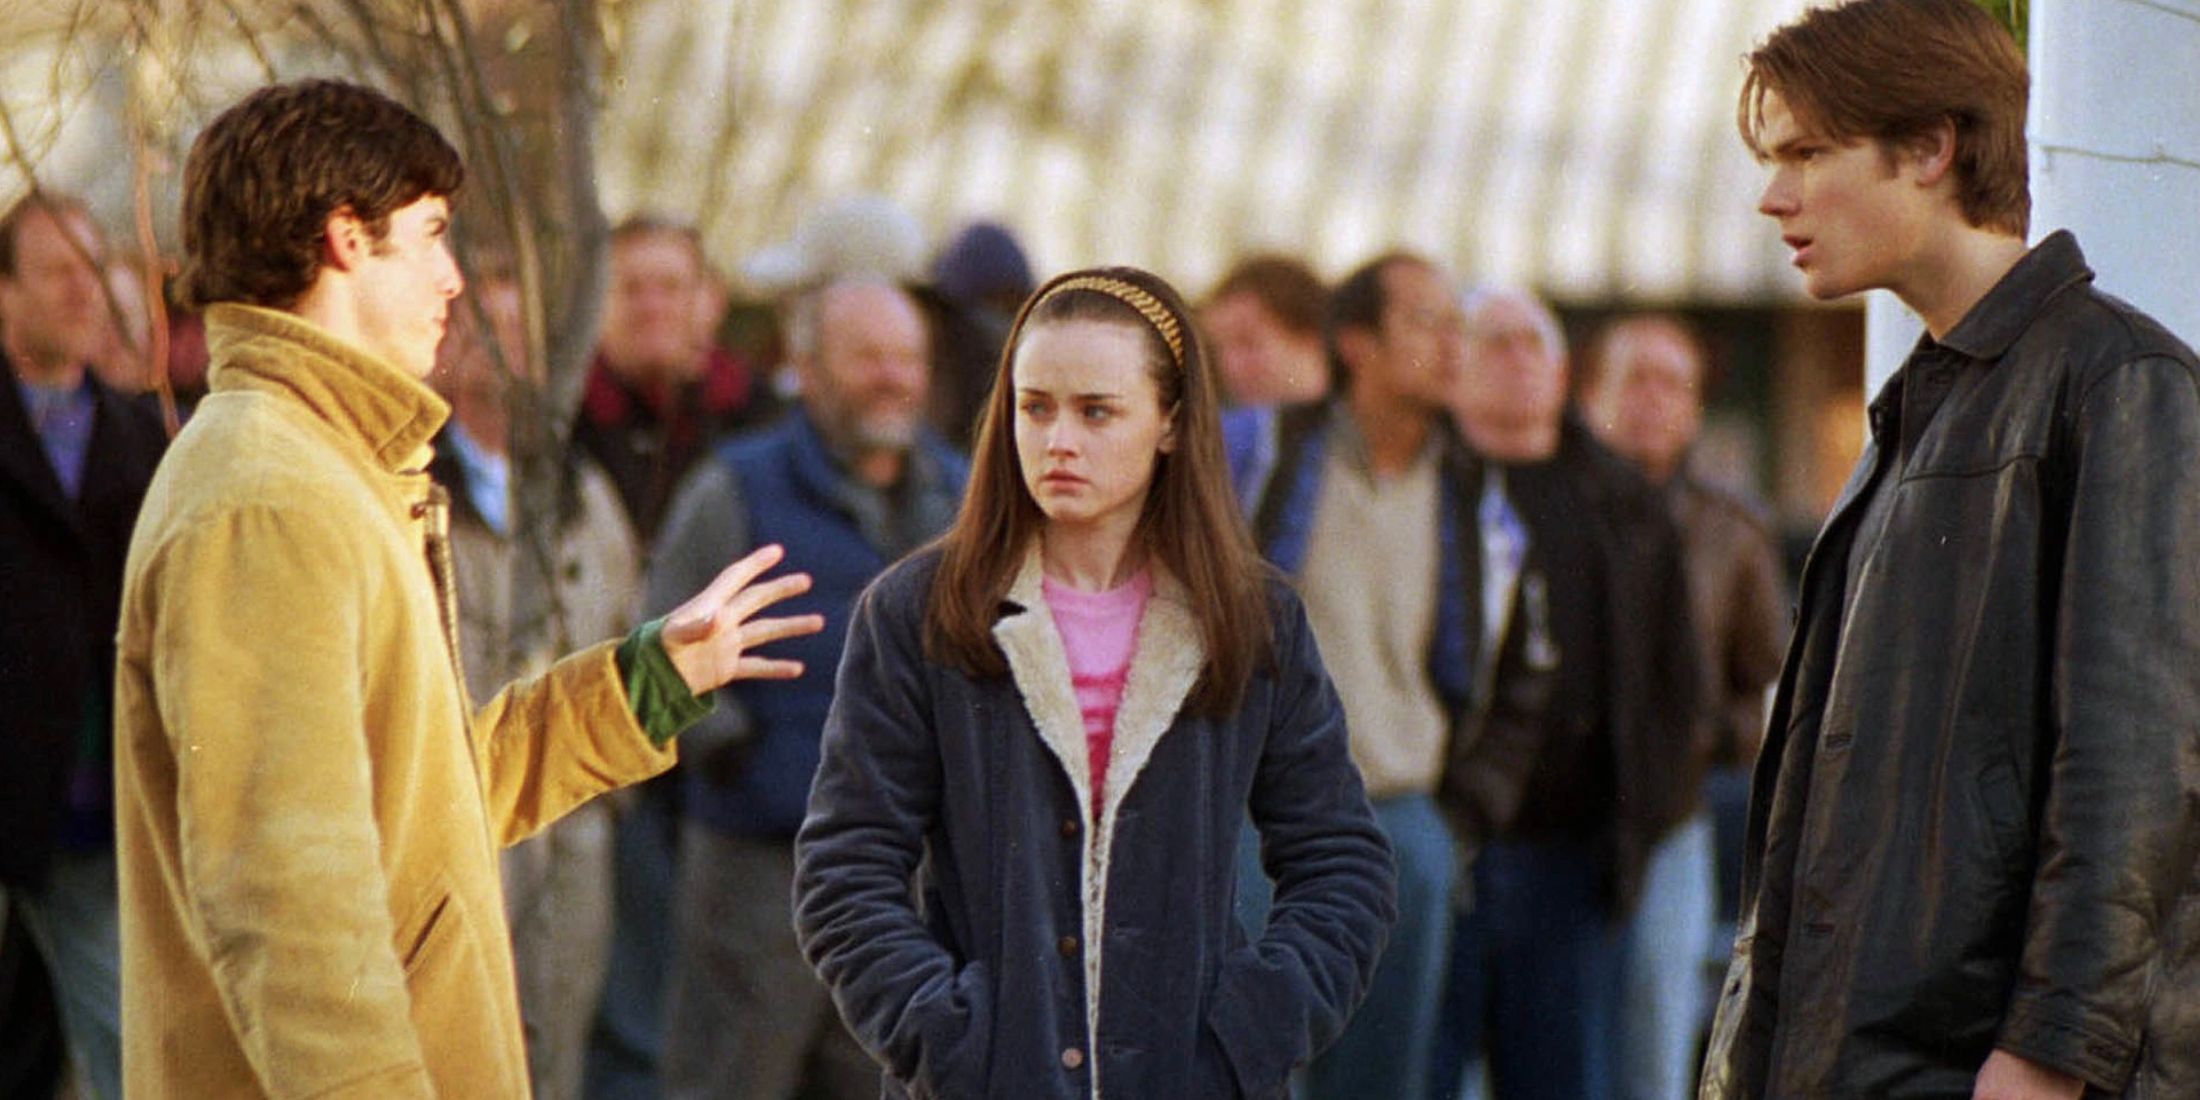 Jess and Dean argue with Rory in the middle in Gilmore Girls "A Tisket A Tasket" episode